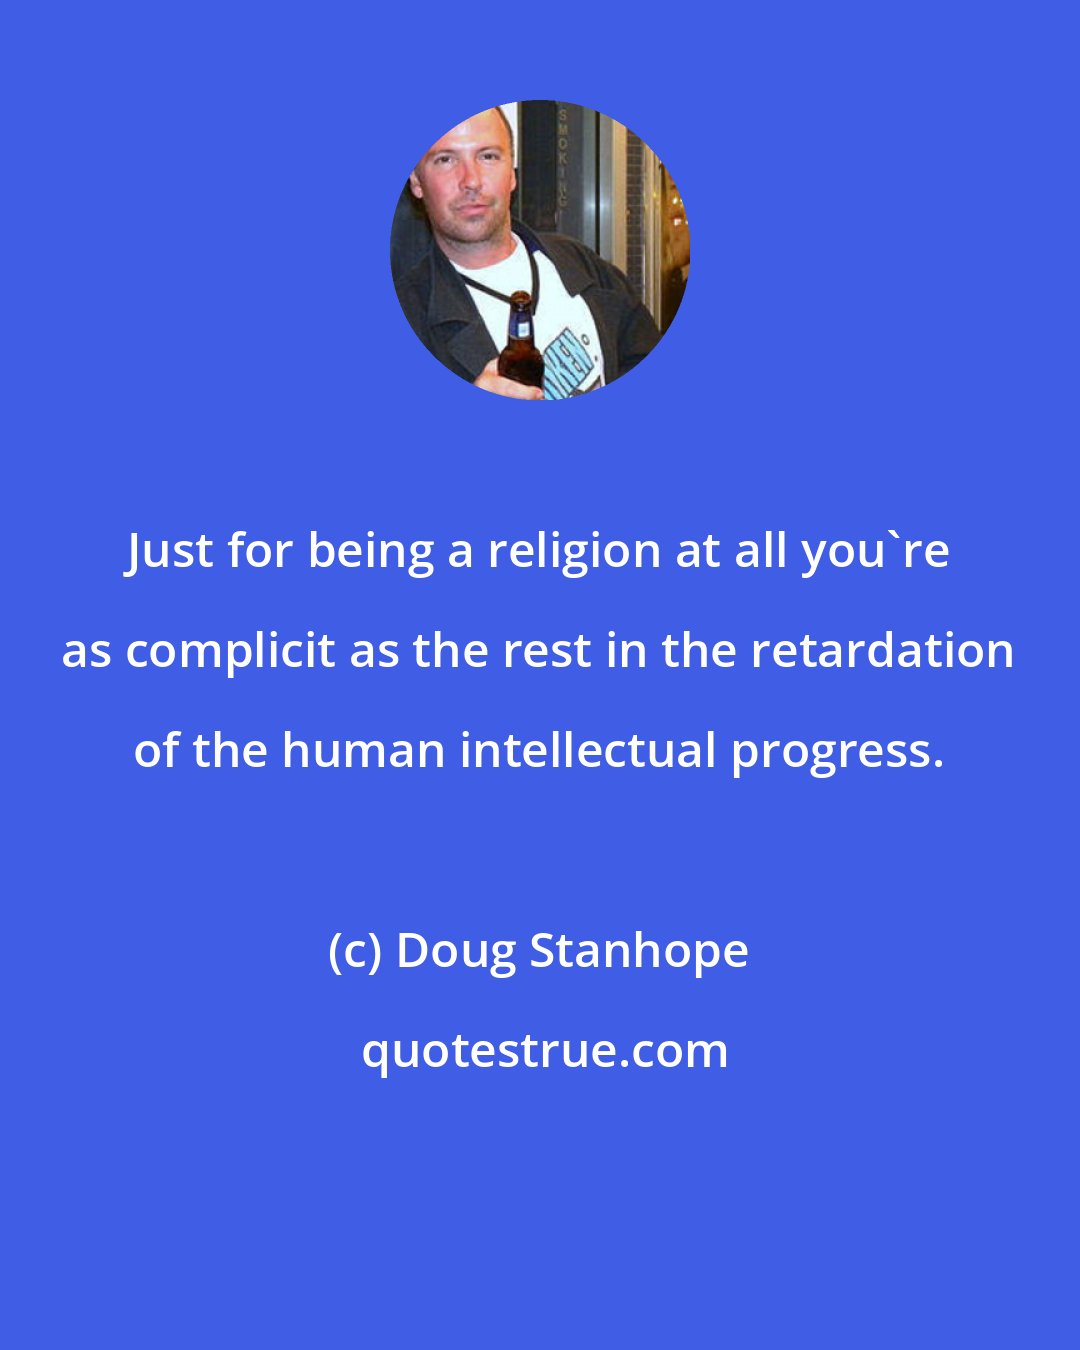 Doug Stanhope: Just for being a religion at all you're as complicit as the rest in the retardation of the human intellectual progress.